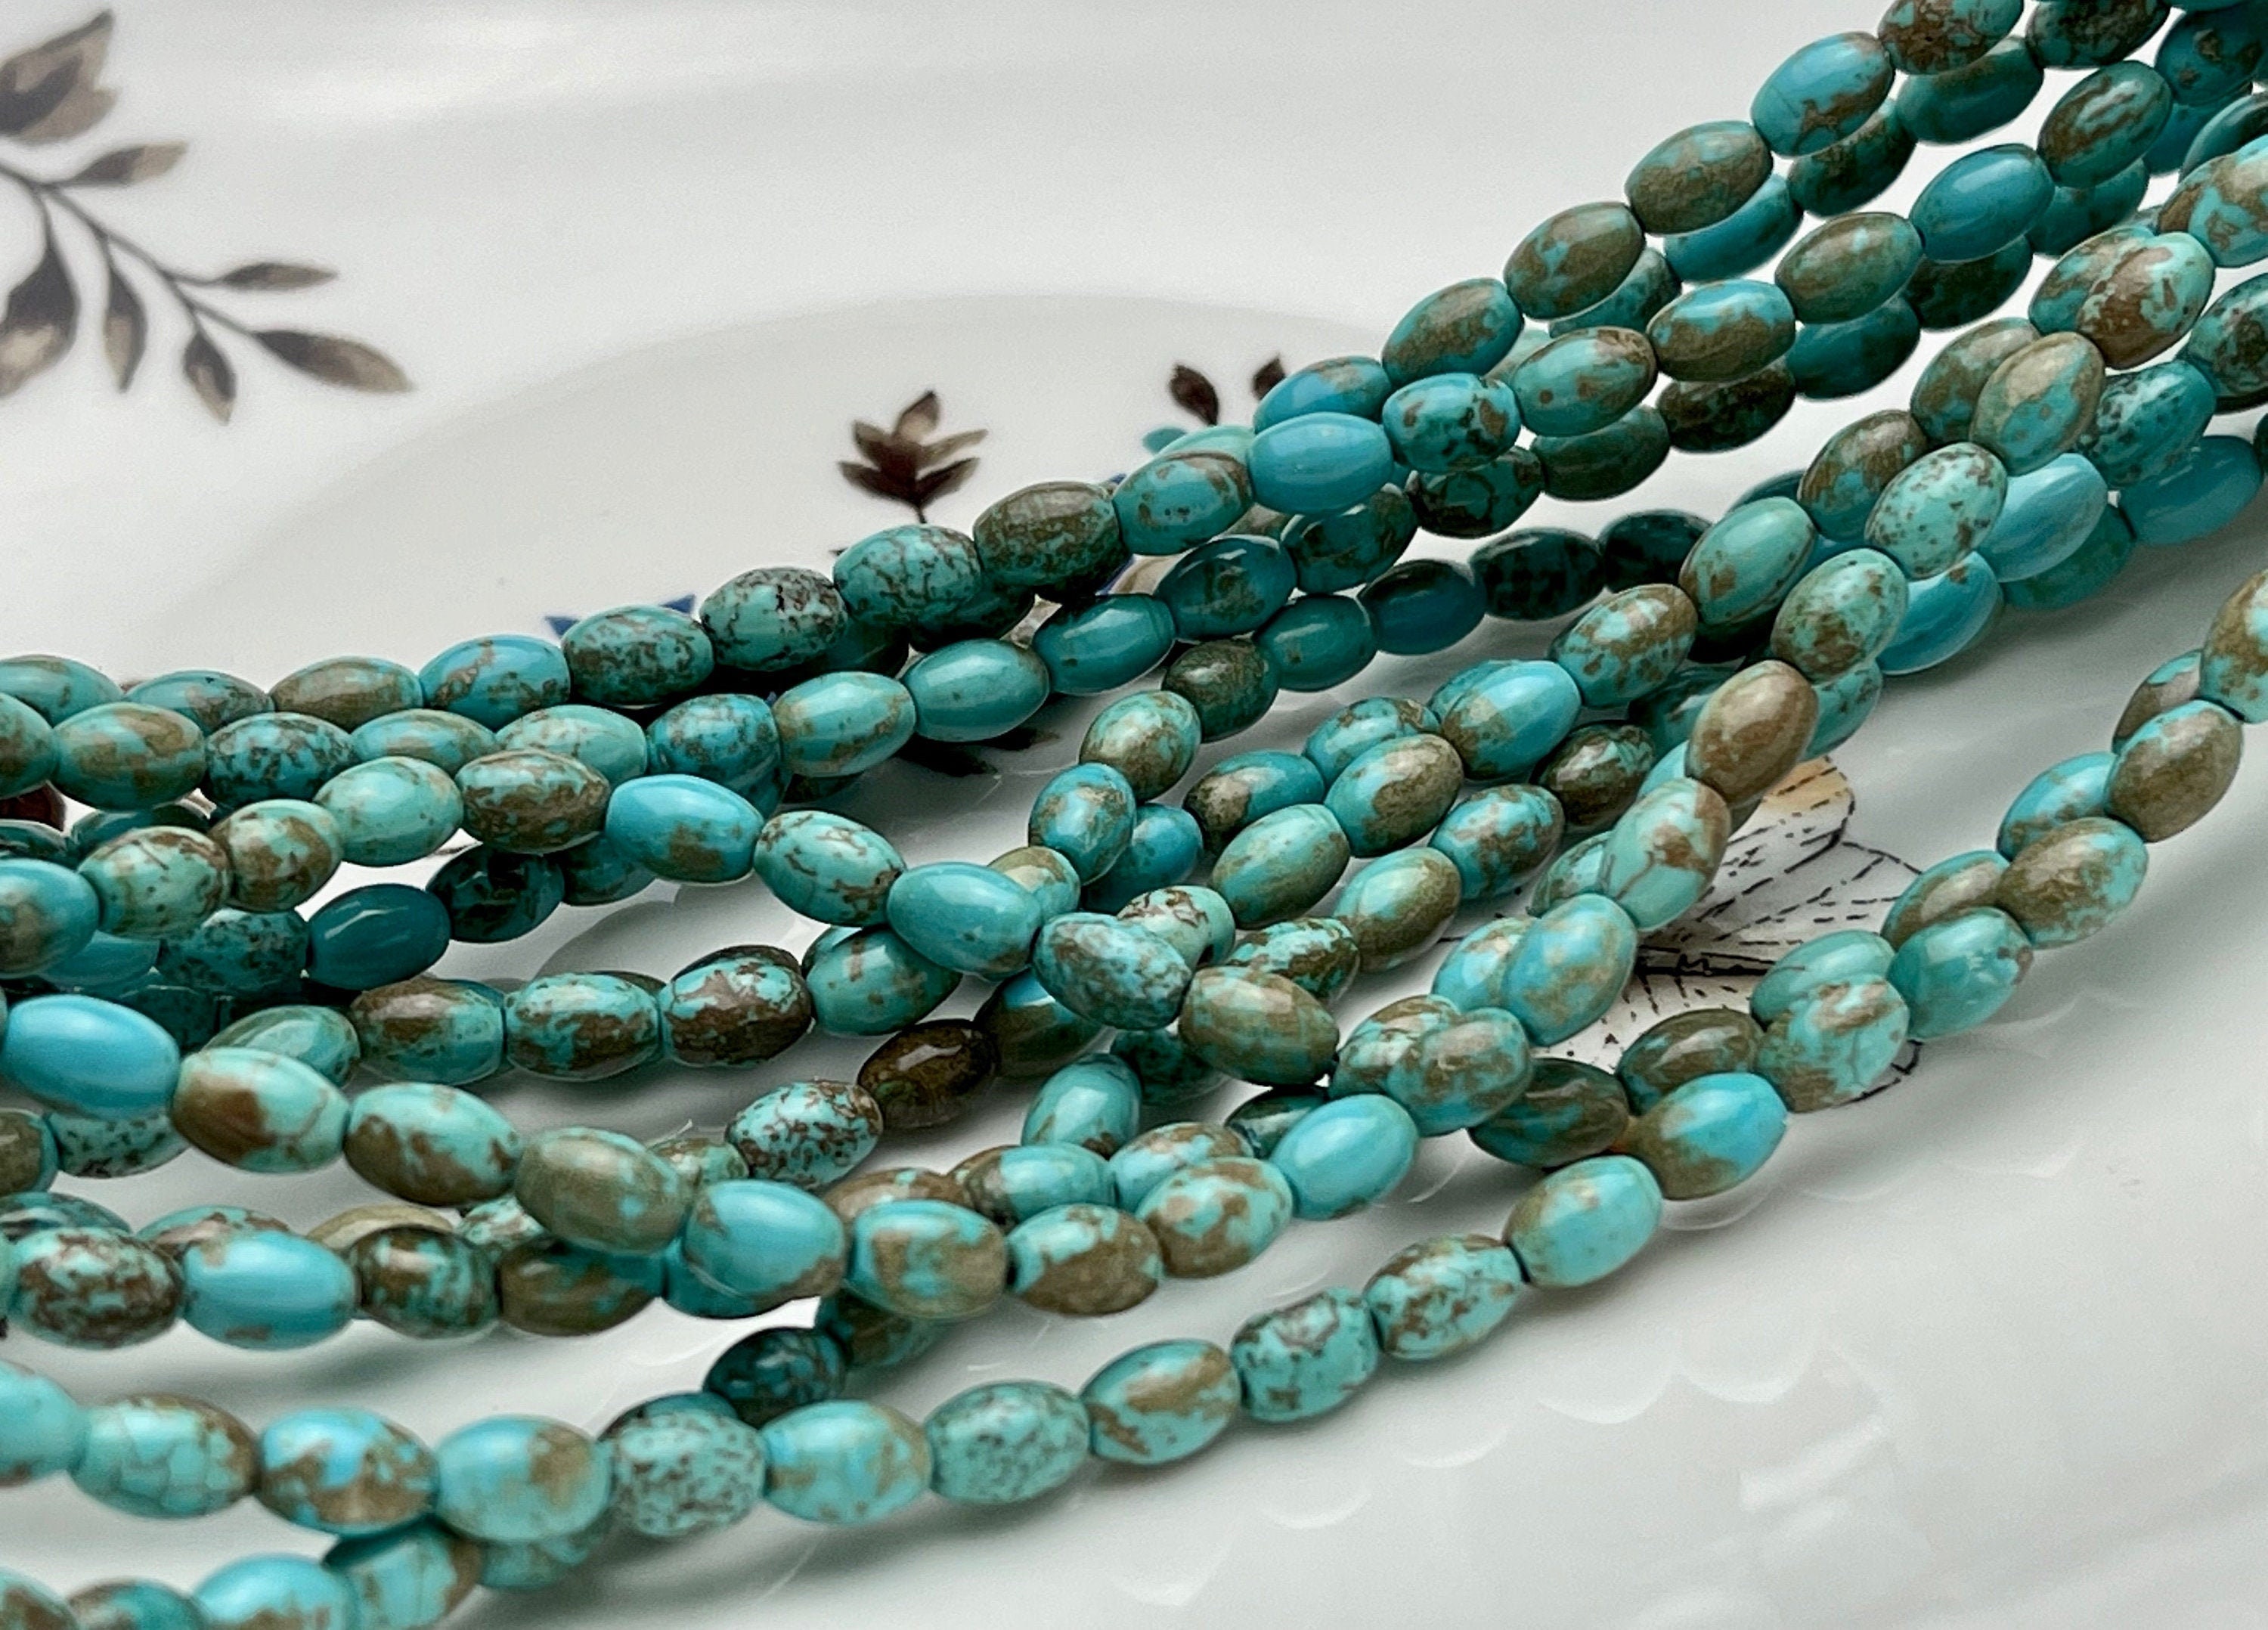 Fashion Loose Strand Real Natural Stone Turquoise Beads For